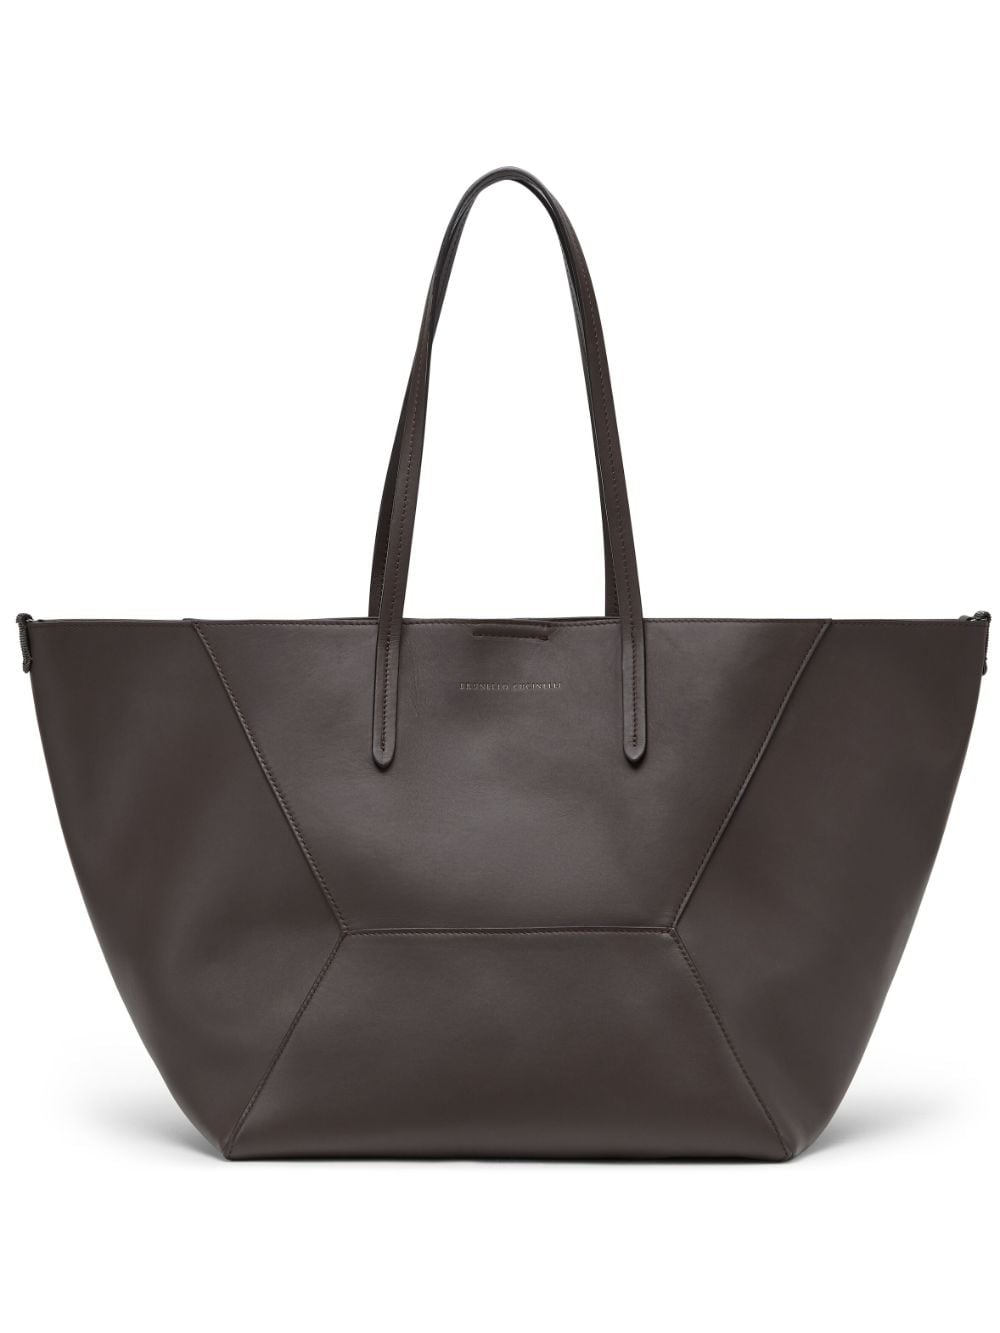 logo-stamp leather tote bag